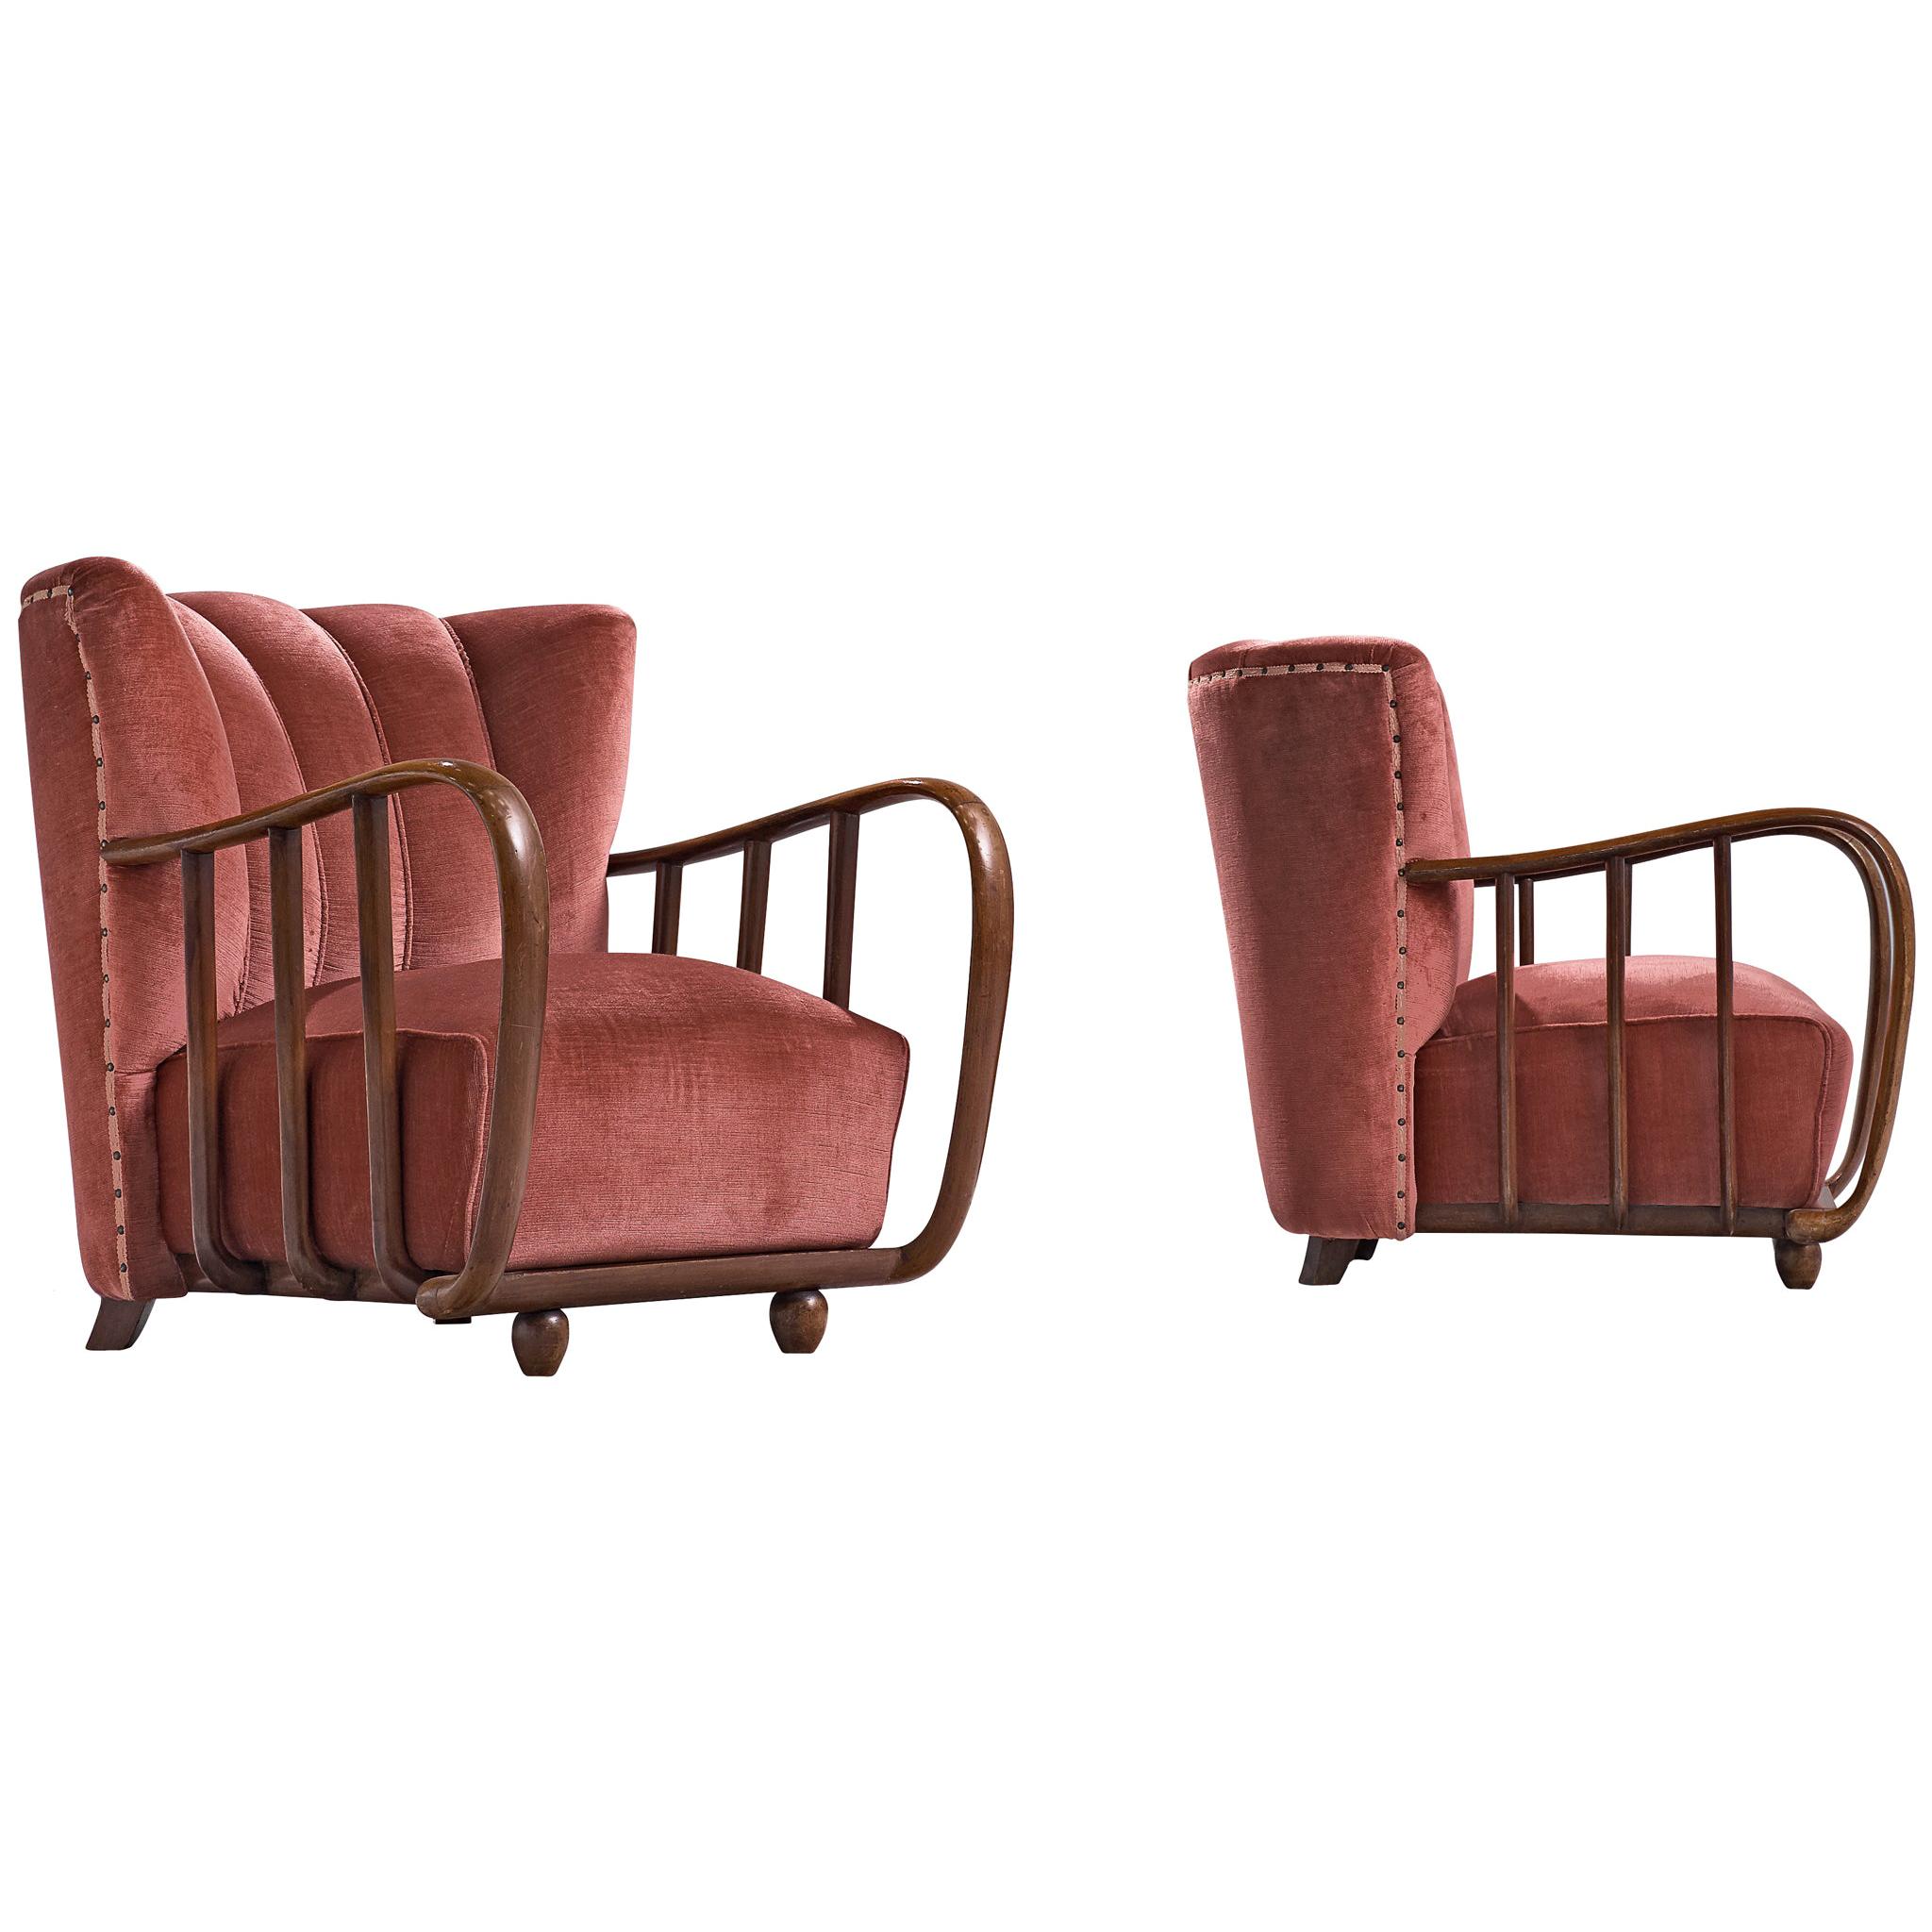 Pair of Italian Art Deco Armchairs with Coral Upholstery, 1940s